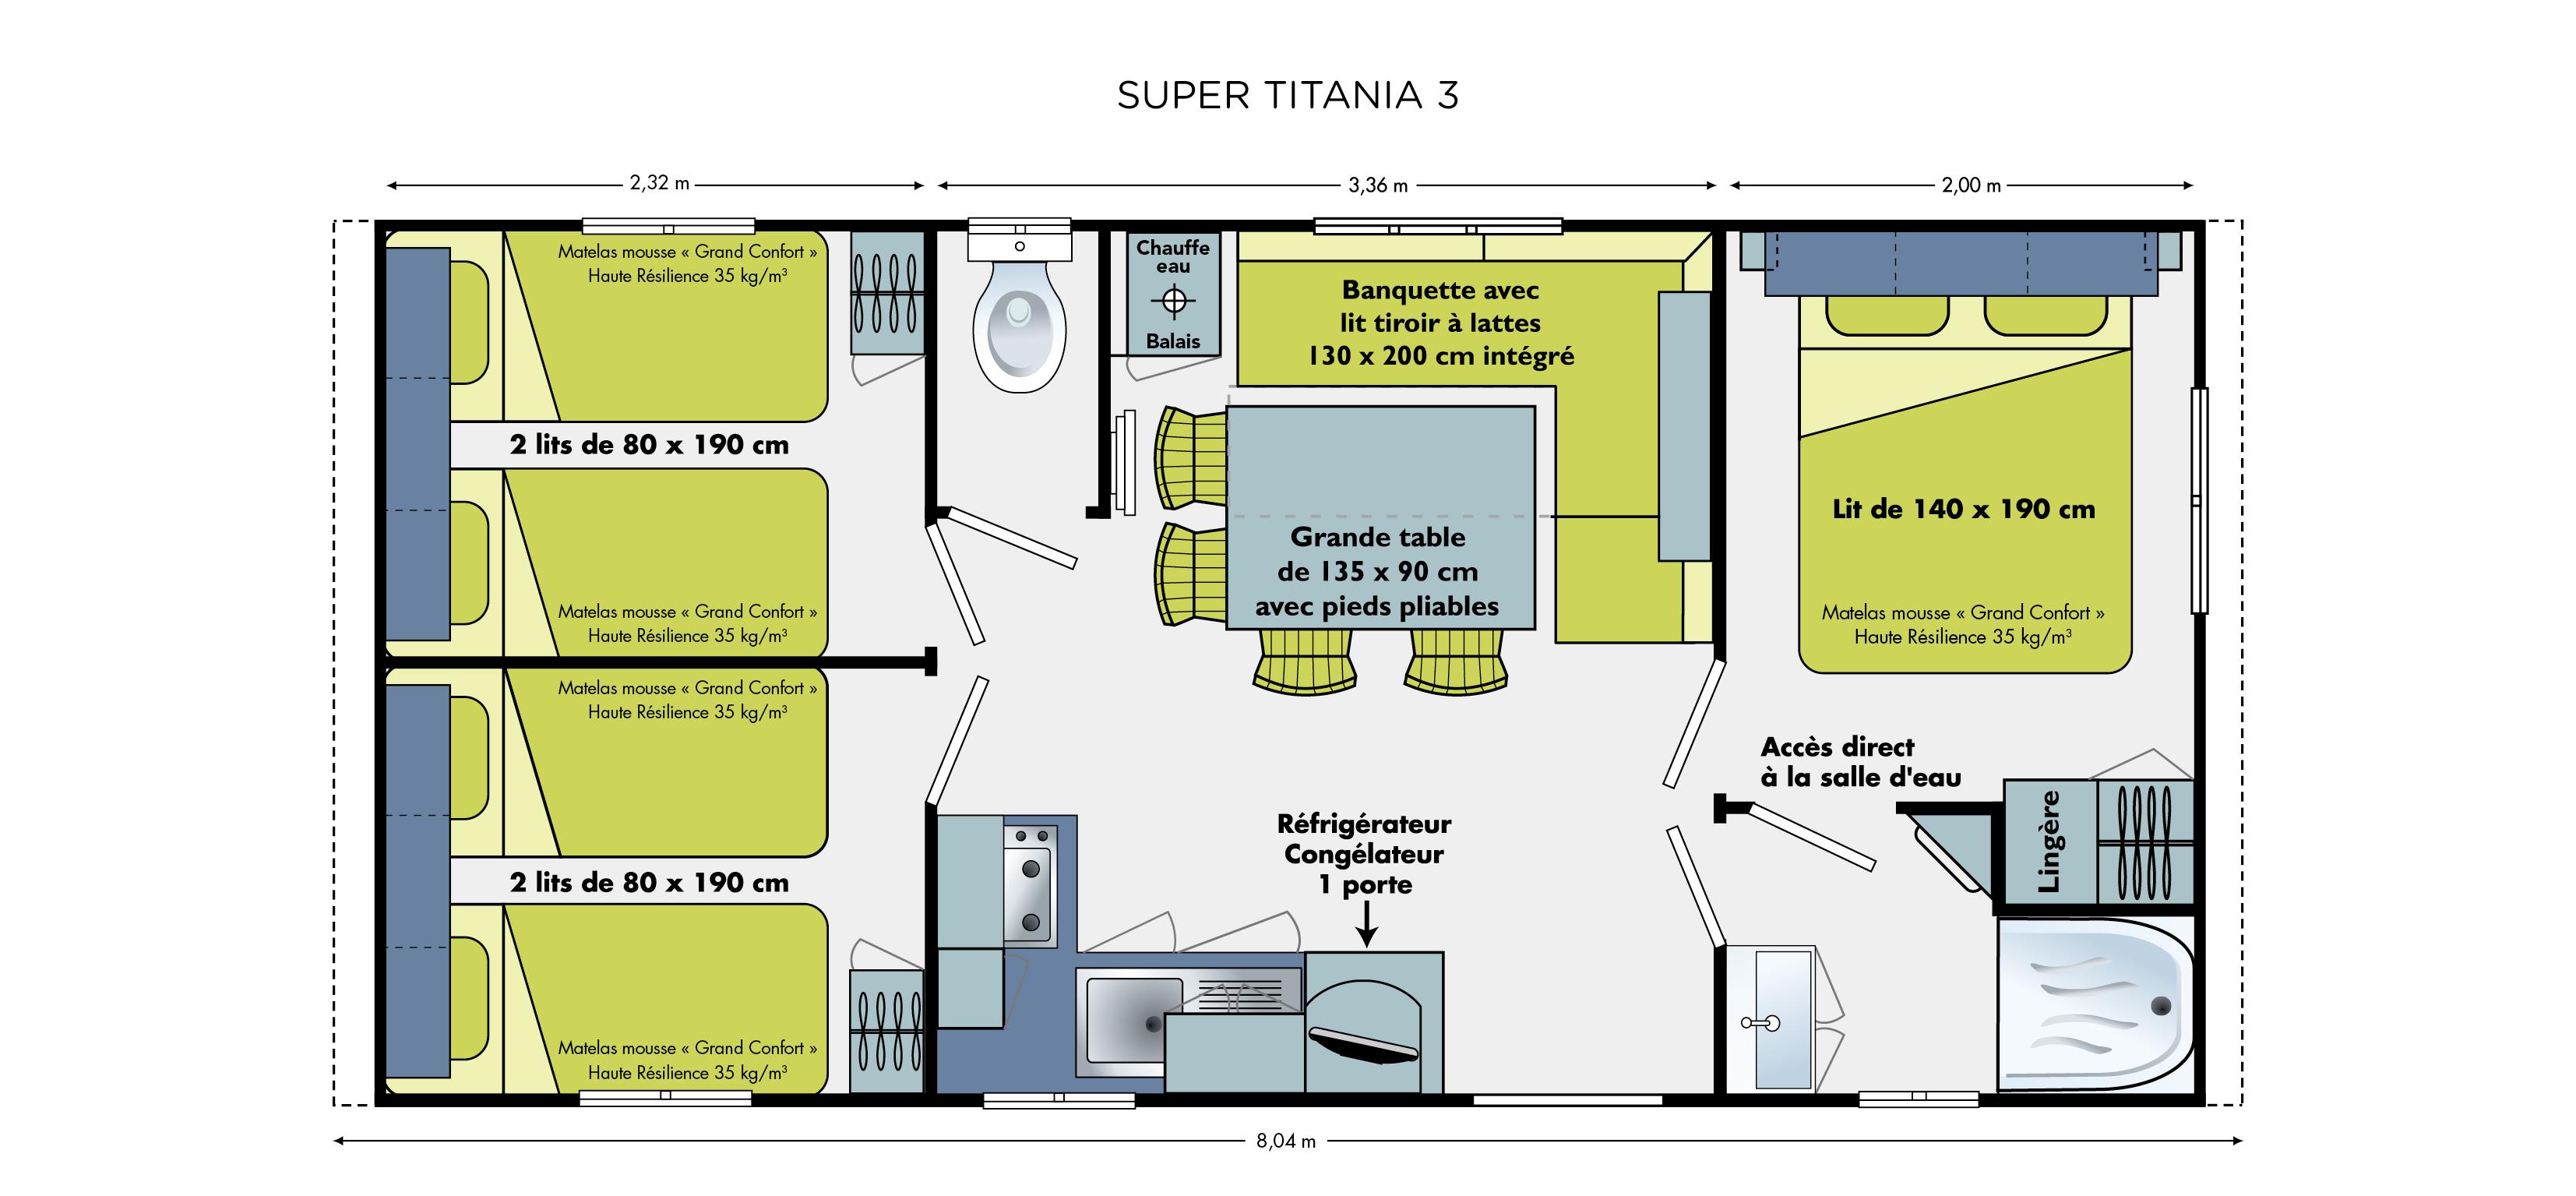 Accommodation - Mobilhome  Super Titania 3 Chambres - Camping Beau Rivage